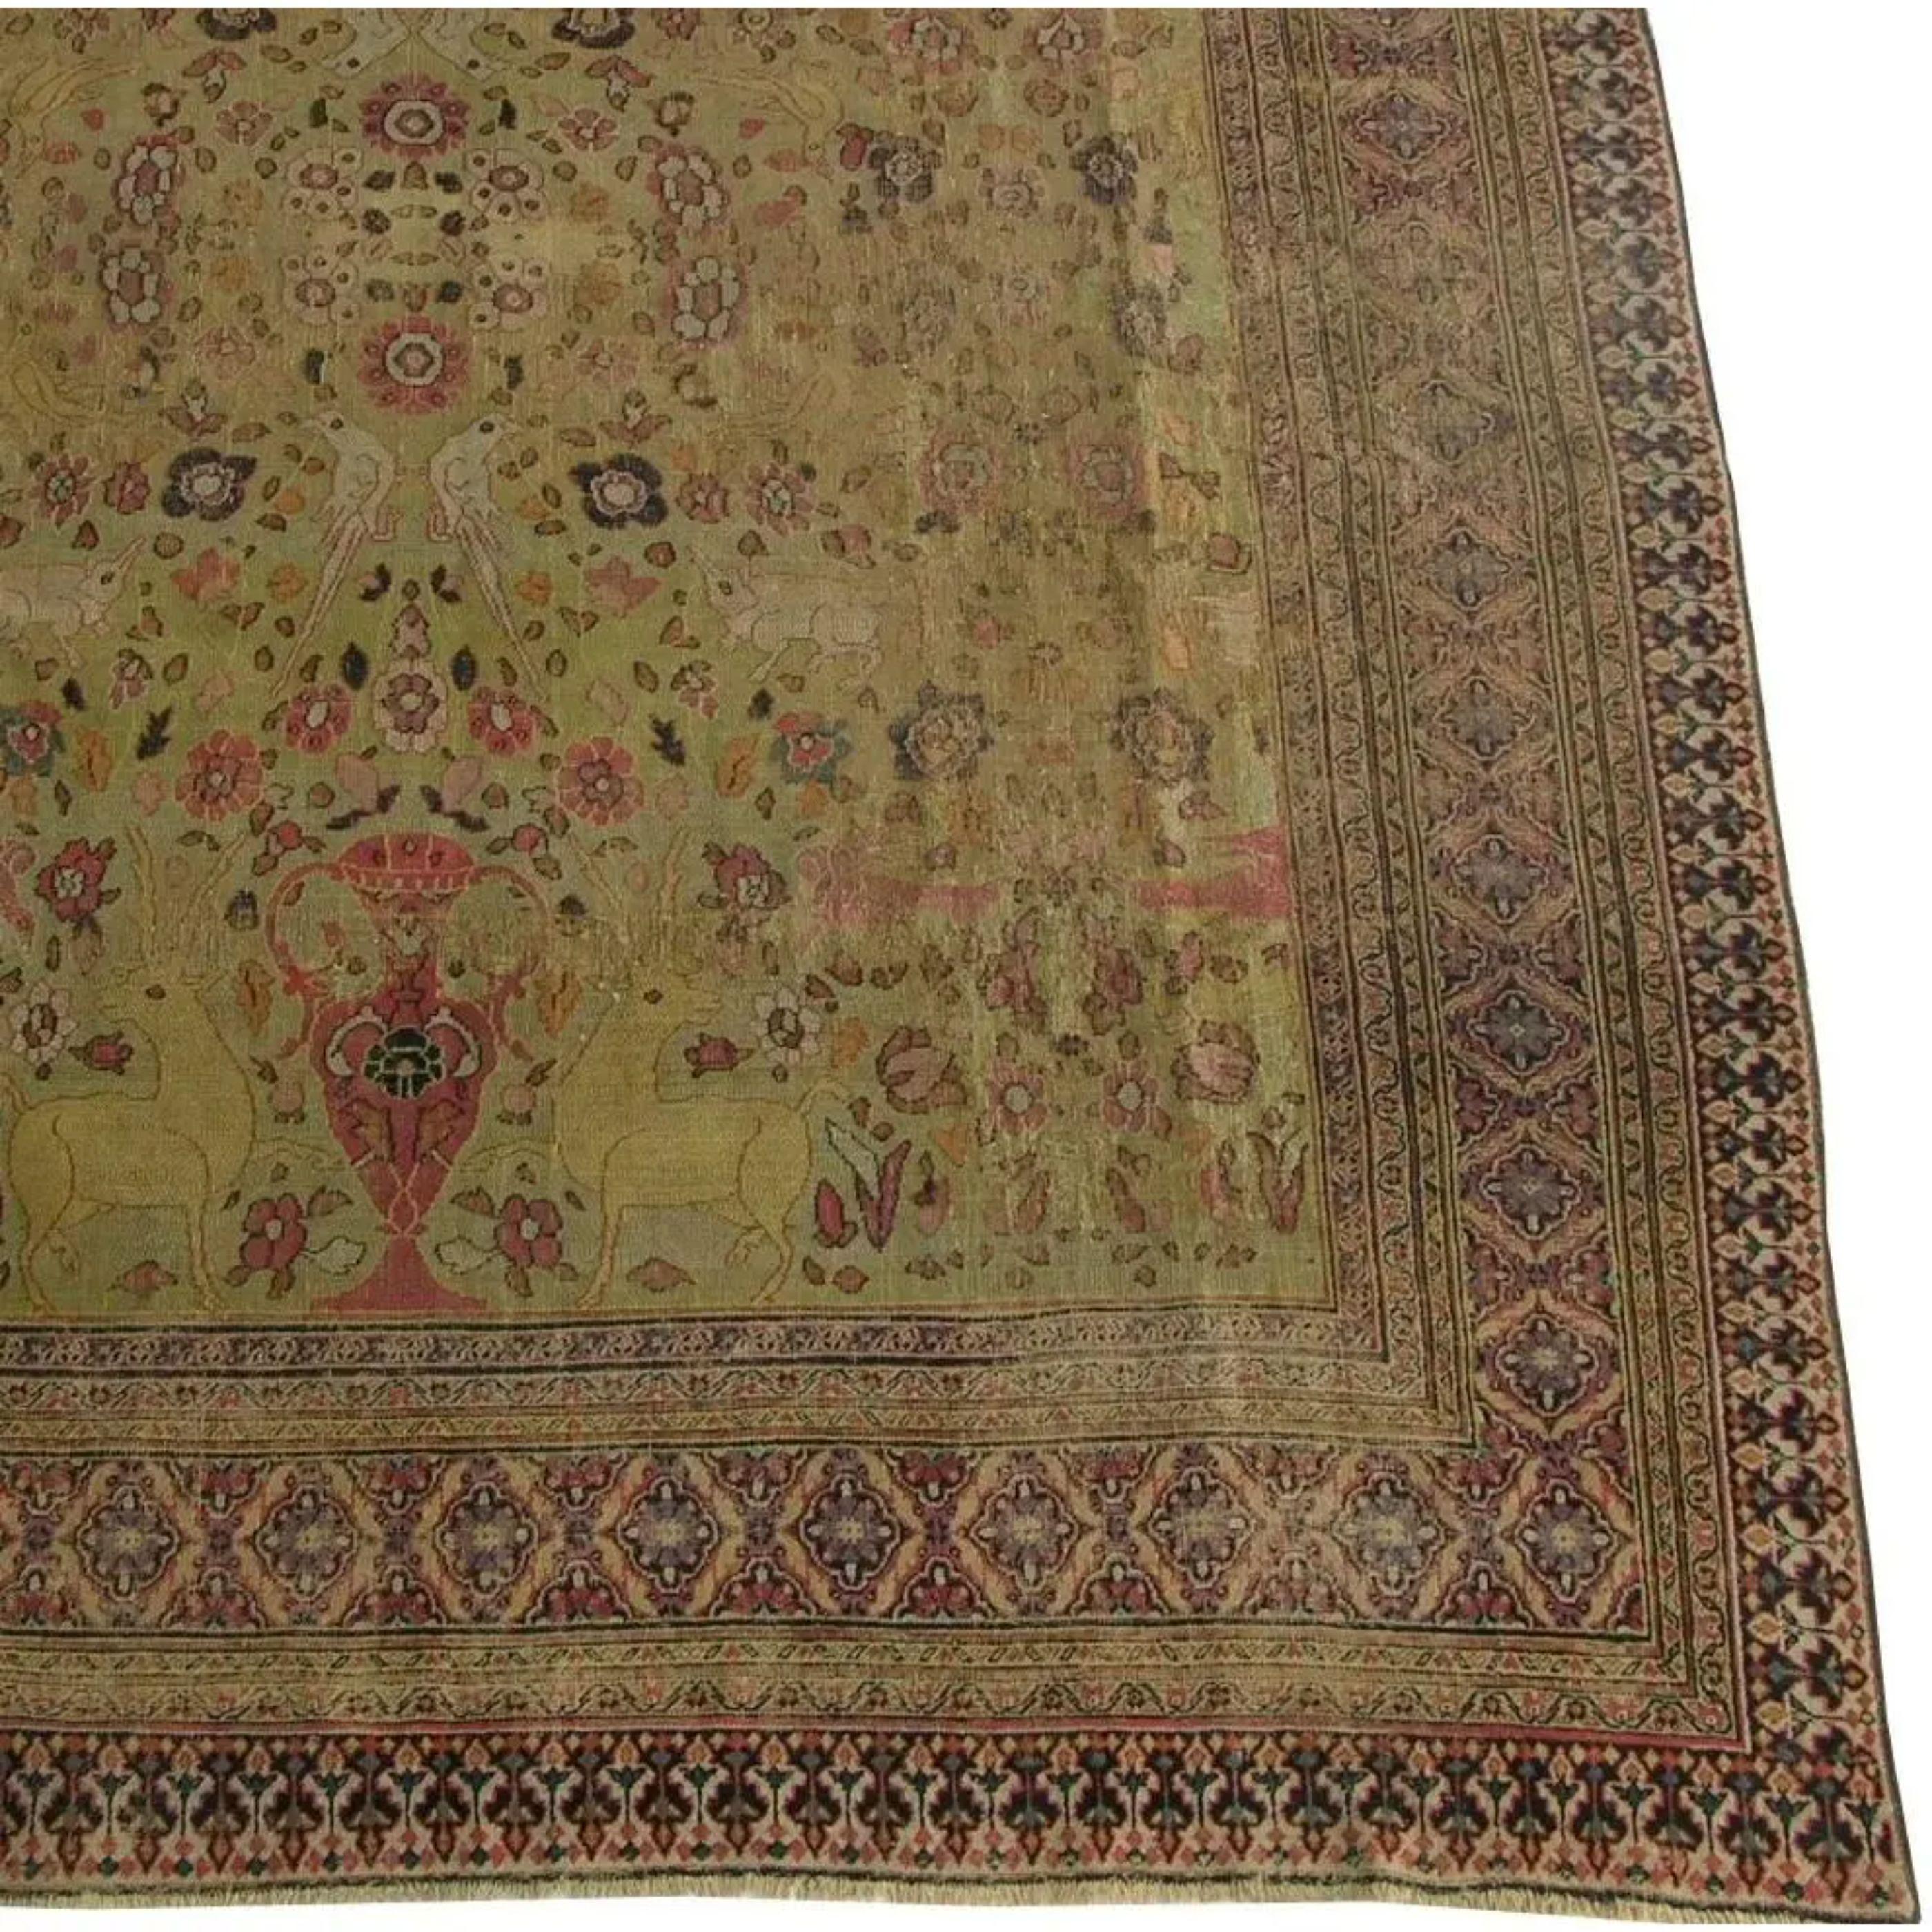 Antique Persian Dorokhsh Rug 11'7'' X 8'10'', Traditional and Tribal, Authentic